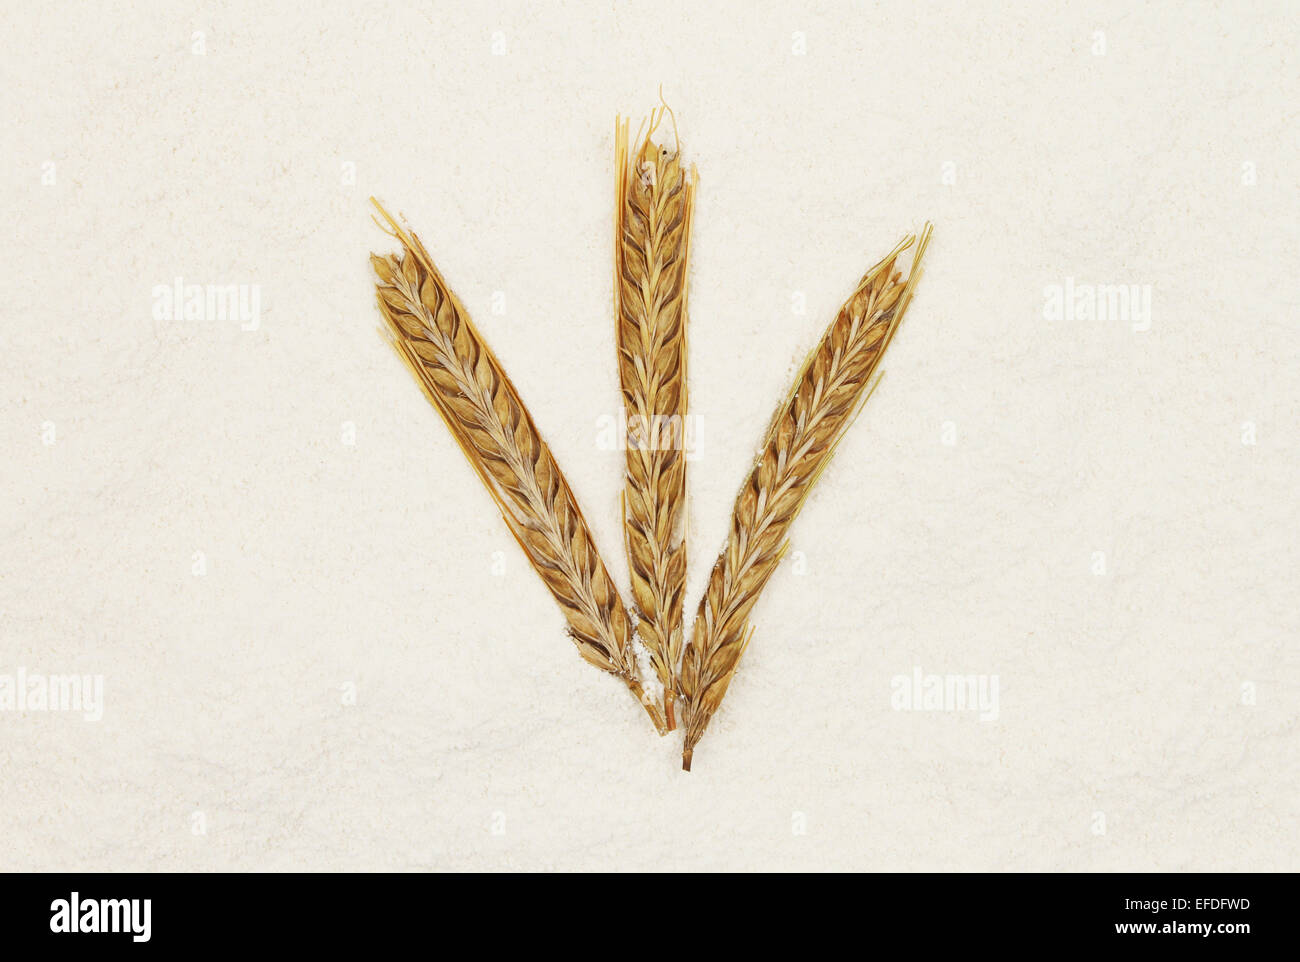 Three ears of barley on a bed of flour Stock Photo